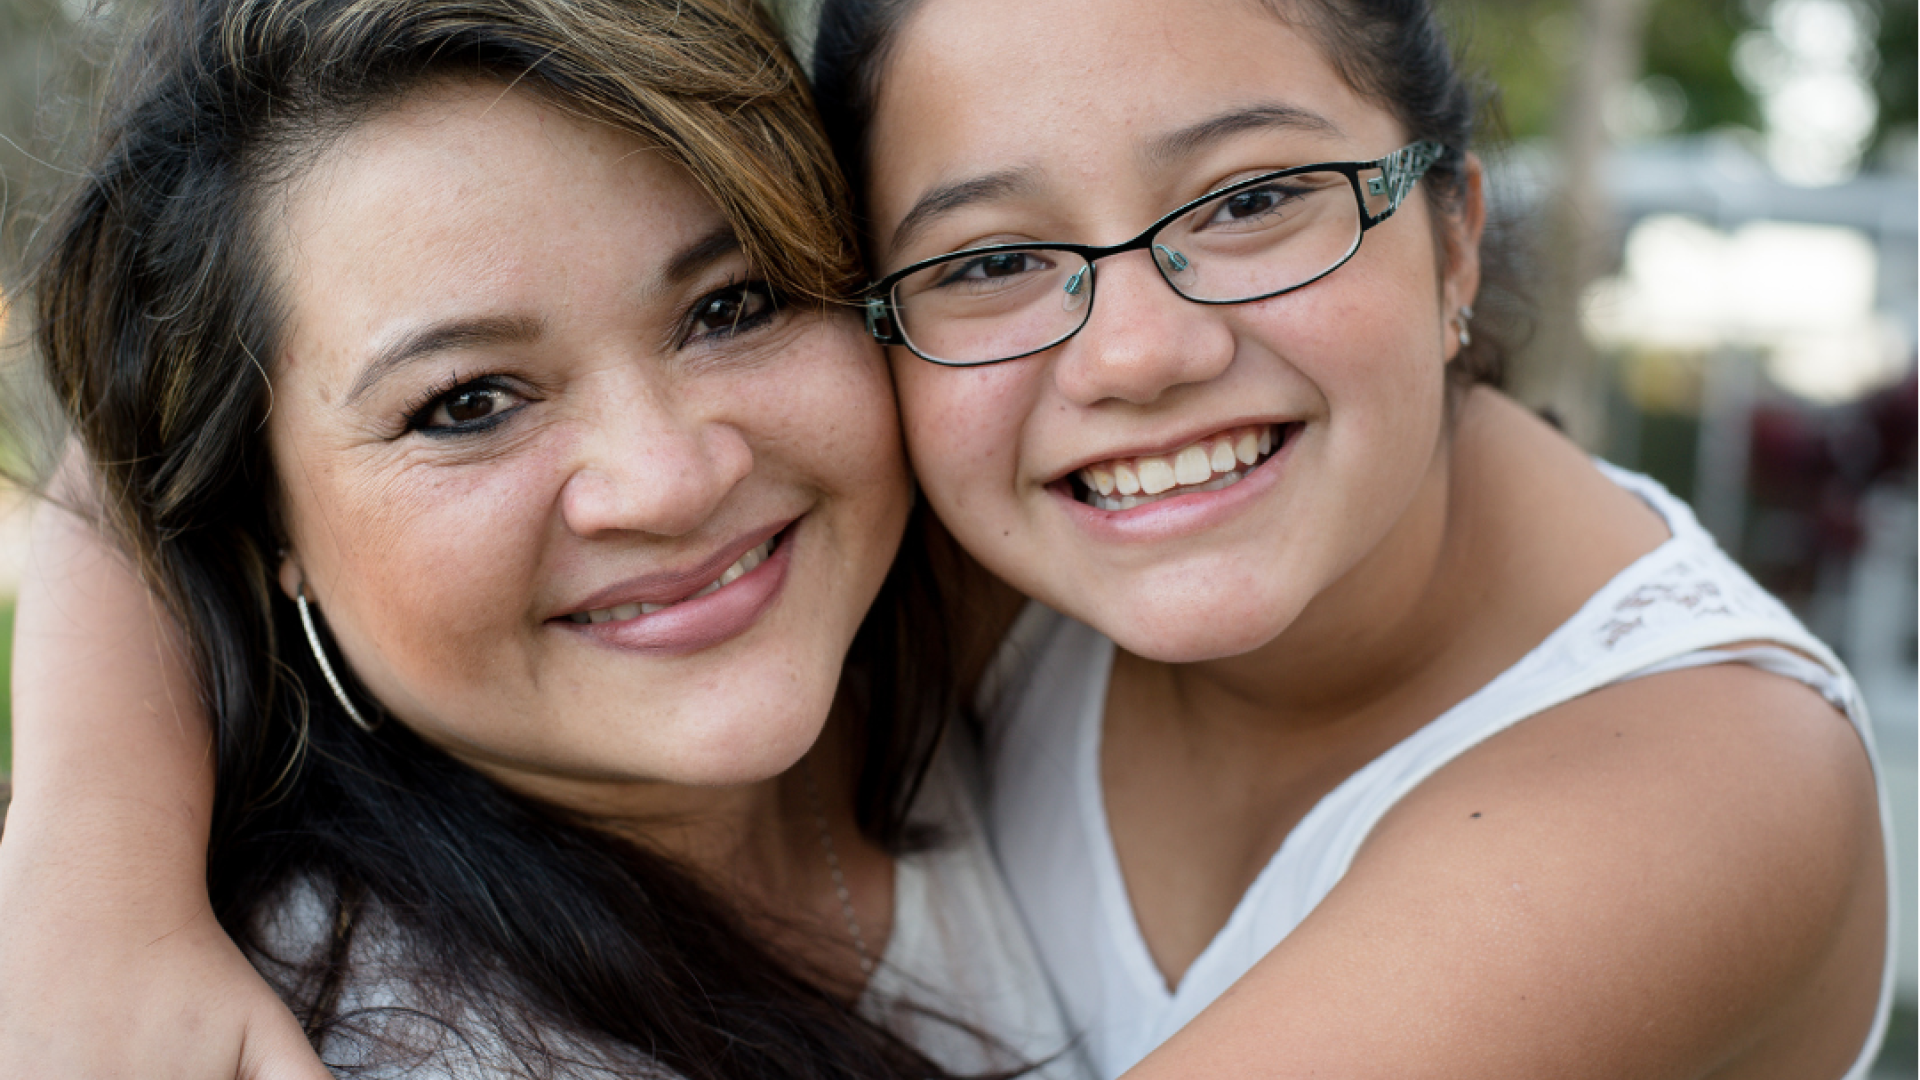 A woman and her daughter smile at the camera